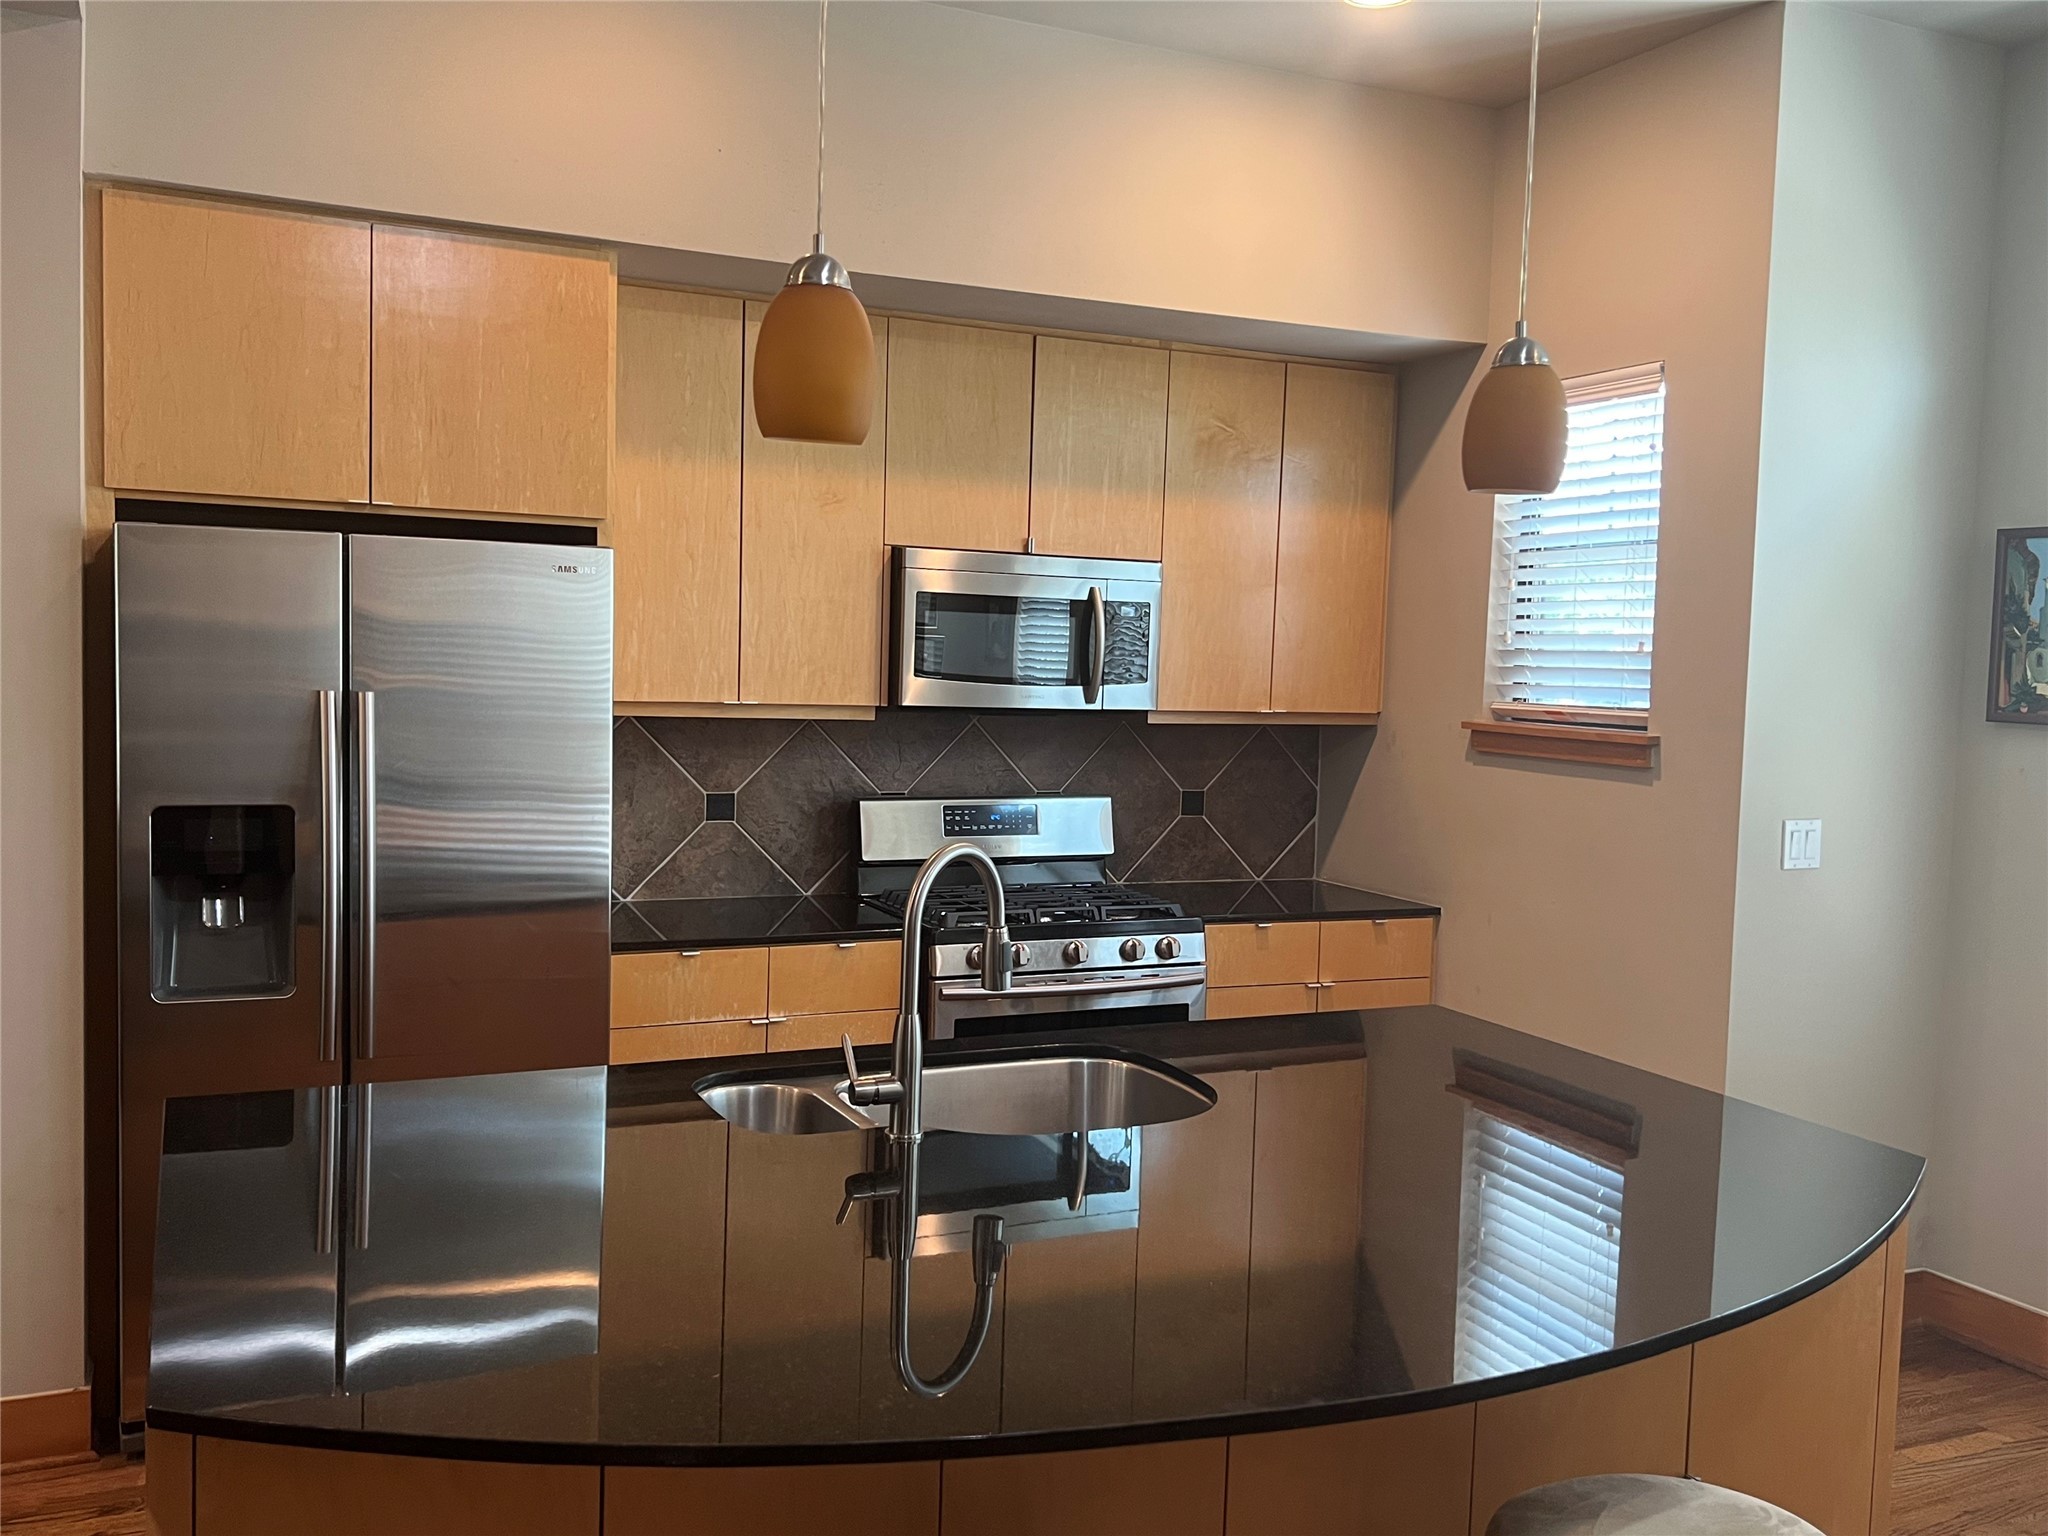 Stunning gourmet kitchen with Samsung stainless appliances, granite counters, recessed lighting with breakfast area.